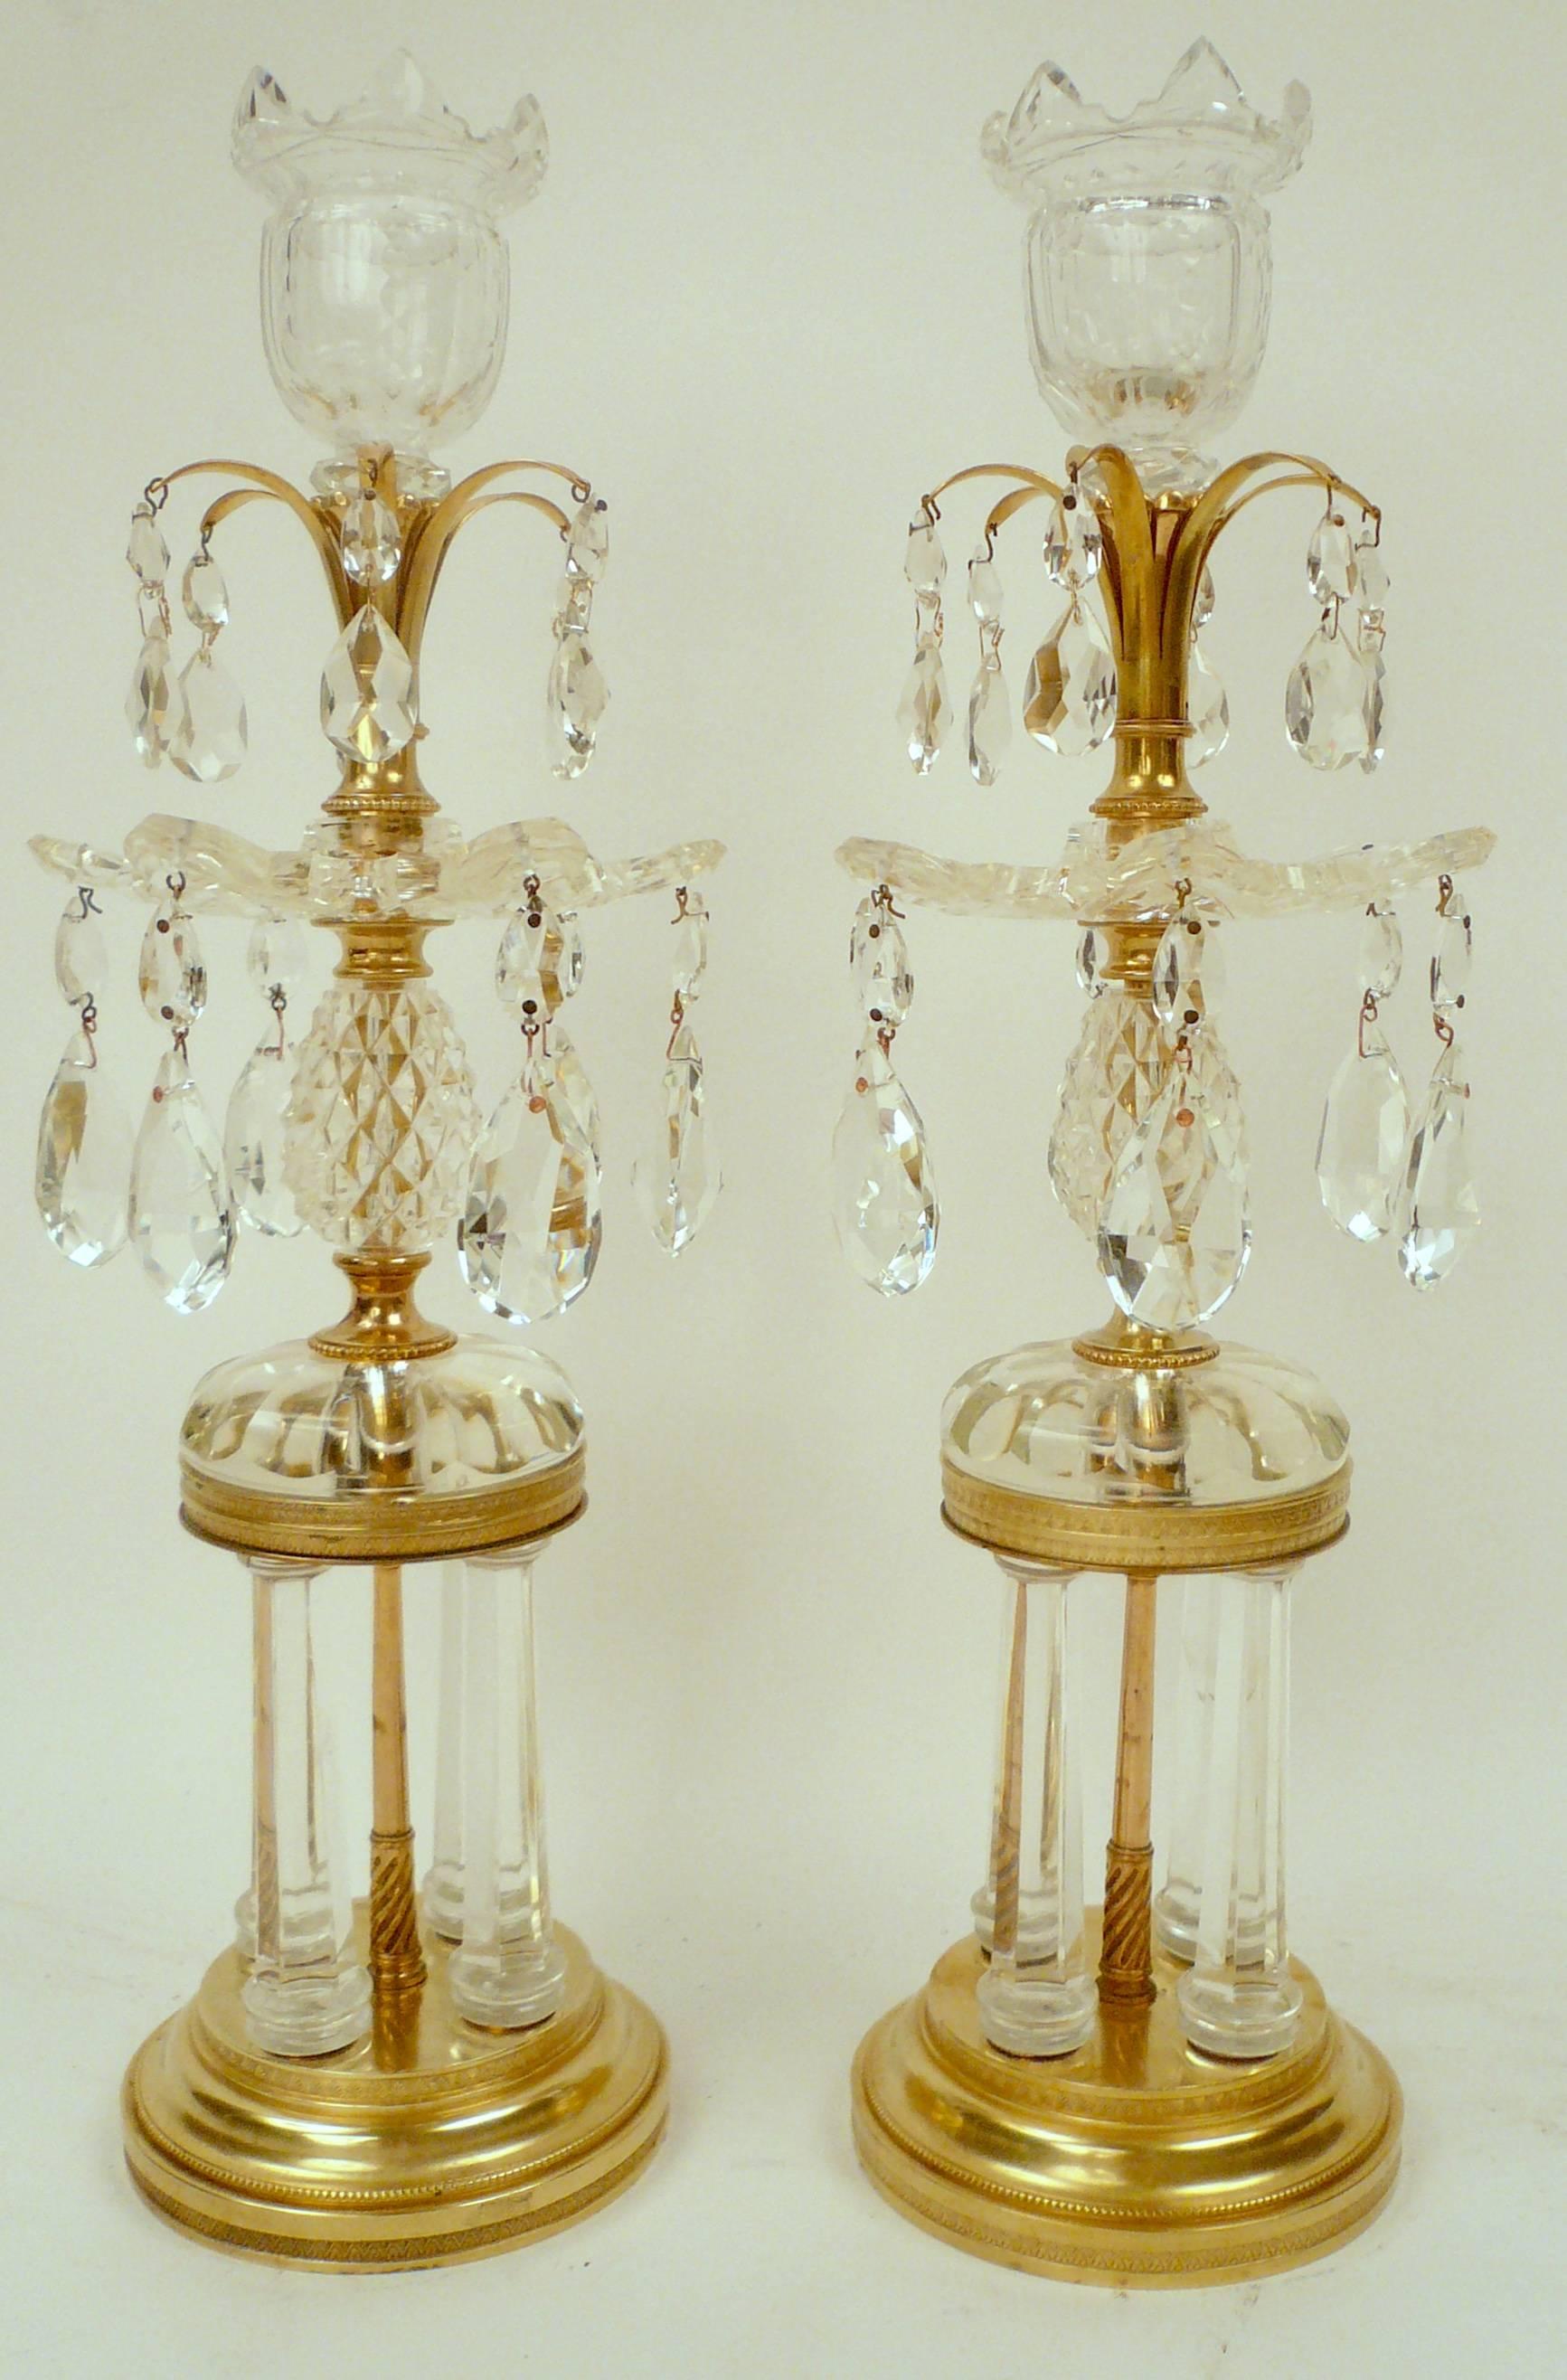 A fine pair of late 18th century cut crystal temple form candlesticks attributed to Parker and Perry with Vandyke bobeches and candle cups, and cut-glass drops.
The bronze stepped plinth form bases with cut crystal columns support a faceted crystal